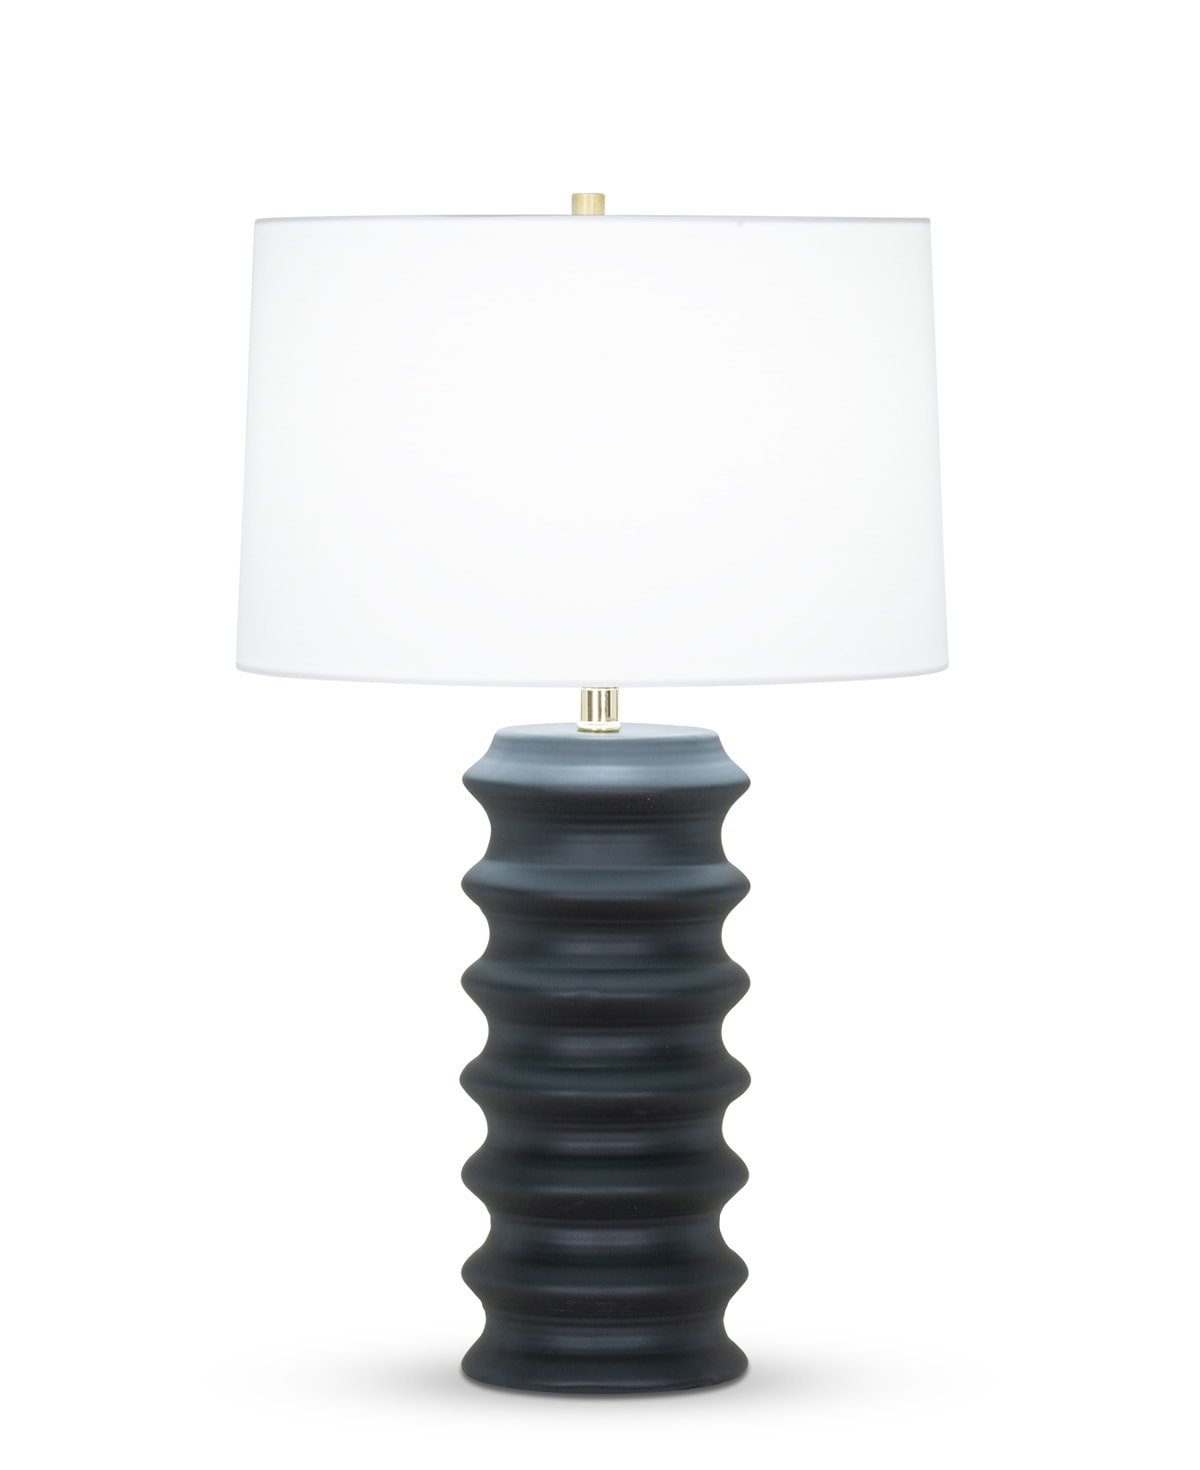 FlowDecor Antonio Table Lamp in ceramic with black matte finish and off-white cotton tapered drum shade (# 4395)